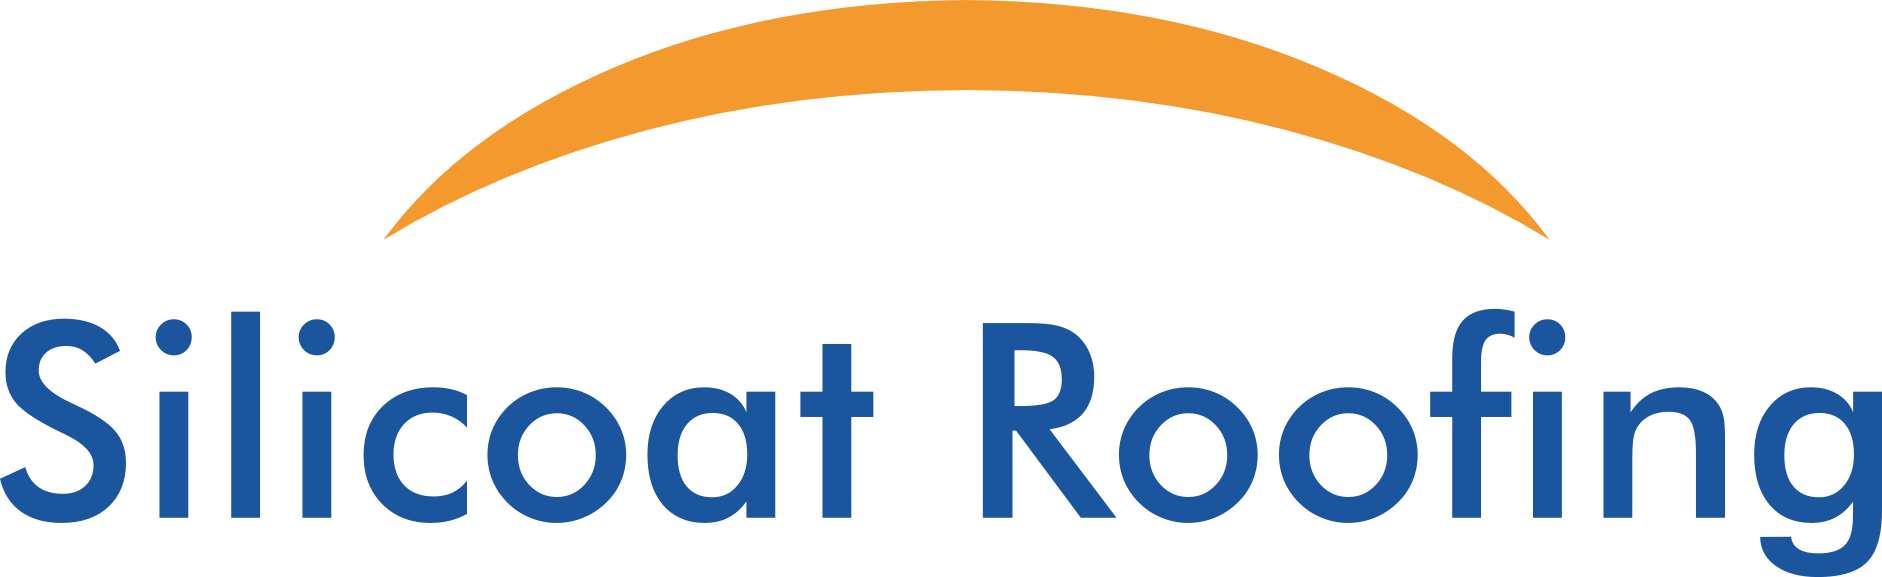 Silicoat Roofing  